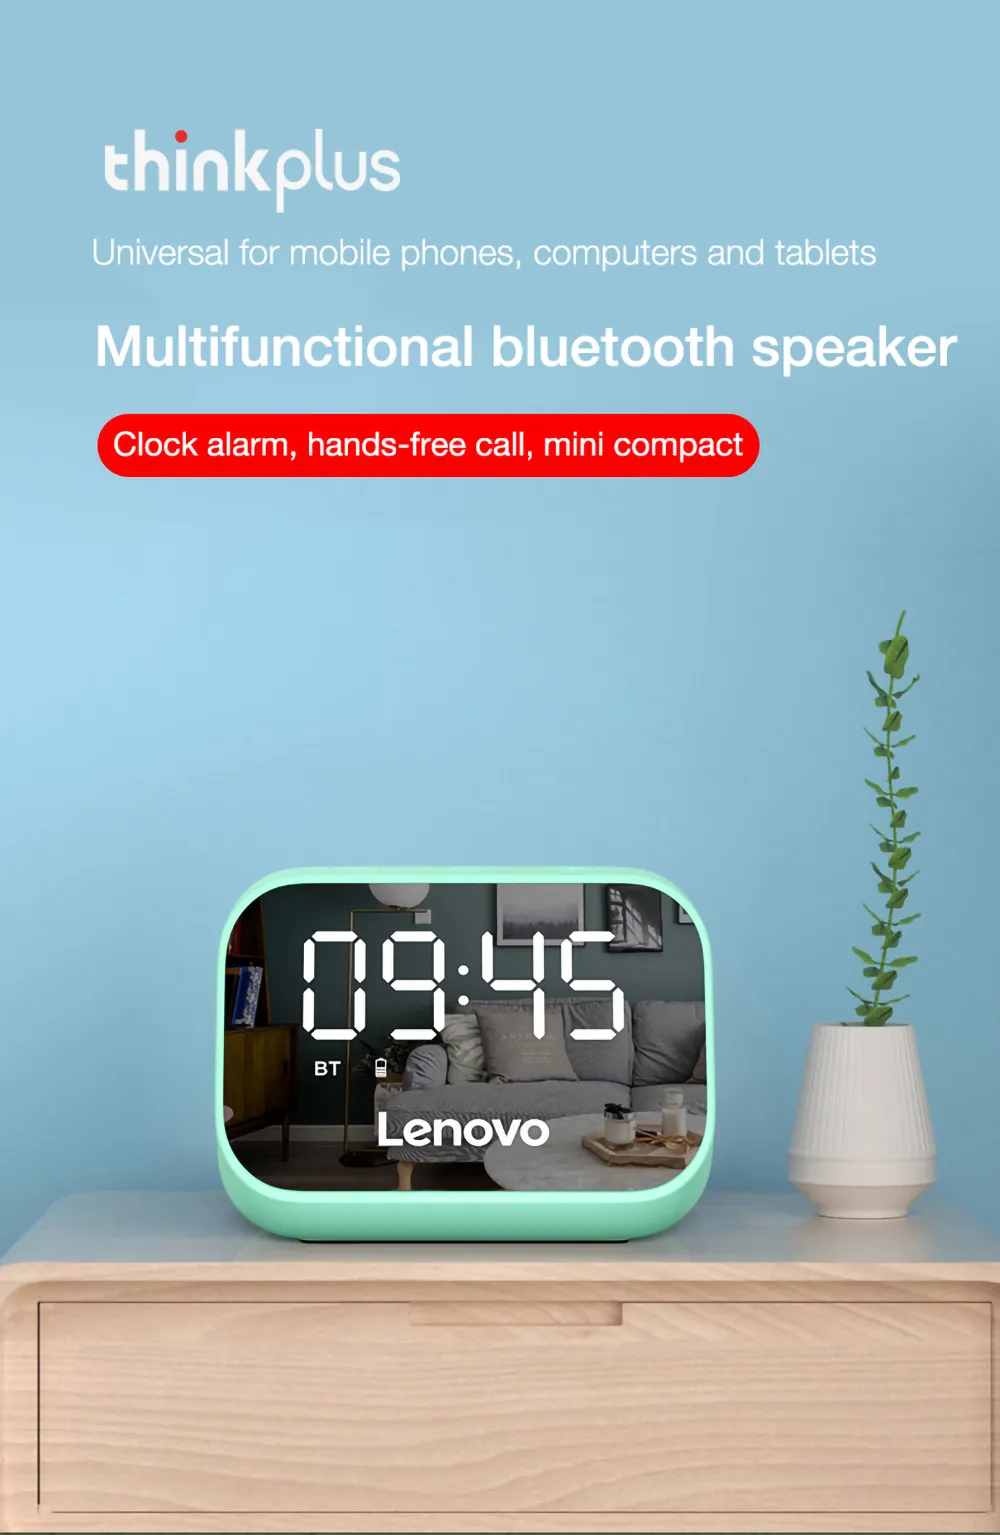 Format,Webp Lenovo &Lt;H1 Data-Spm-Anchor-Id=&Quot;A2700.Wholesale.0.I2.145212B4Vefzlw&Quot;&Gt;Lenovo Ts13 Wireless Speaker With Clock - Black&Lt;/H1&Gt; Https://Www.youtube.com/Watch?V=Ux8Vt6Ijy4Y 1. Speaker Unit: 3W*2Pcs 2. Standby Time: 12H 3. Charging Time: 1-2H 4. Feature: Airplay, Video Call, Phone Function, Alarm, Clock 5. Battery Capacity: 1200Mah 6. Size: 14.7* 11.6* 7.2Cm &Lt;A Href=&Quot;Https://Lablaab.com/?S=Earbuds&Amp;Post_Type=Product&Amp;Product_Cat=0&Quot;&Gt;More Products&Lt;/A&Gt; &Lt;B&Gt;We Also Provide International Wholesale And Retail Shipping To All Gcc Countries: Saudi Arabia, Qatar, Oman, Kuwait, Bahrain. &Lt;/B&Gt; &Lt;Pre&Gt;&Lt;/Pre&Gt; Lenovo Lenovo Ts13 Wireless Speaker With Clock - Black